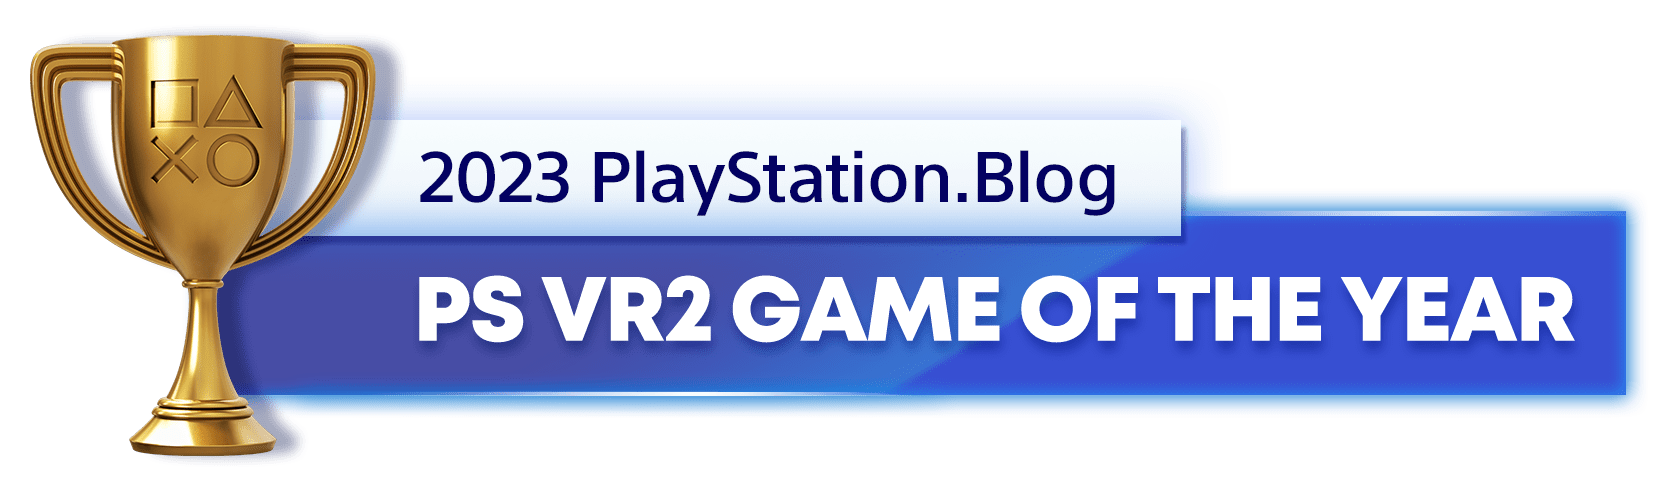 Gold Trophy for the 2023 PlayStation Blog PS VR2 Game of the Year Winner